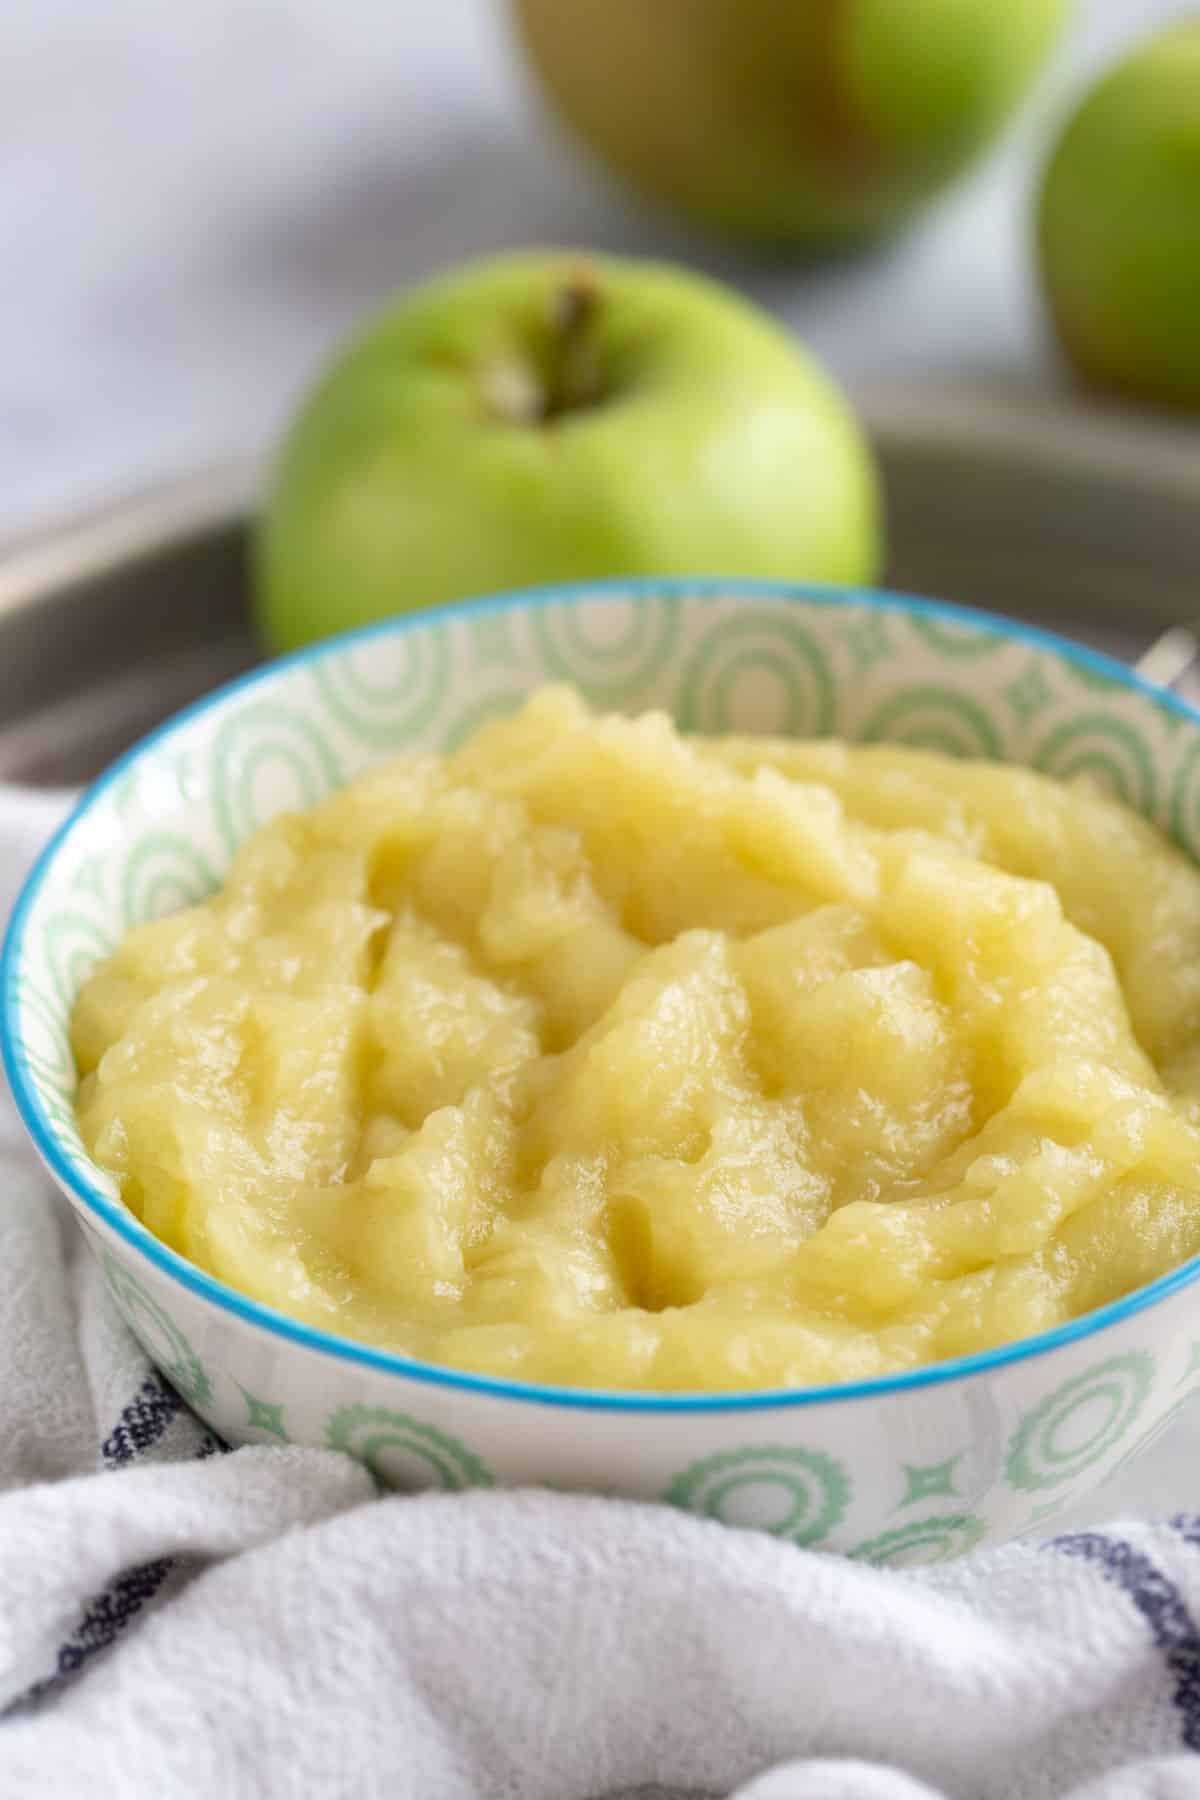 Apple sauce in a serving bowl.